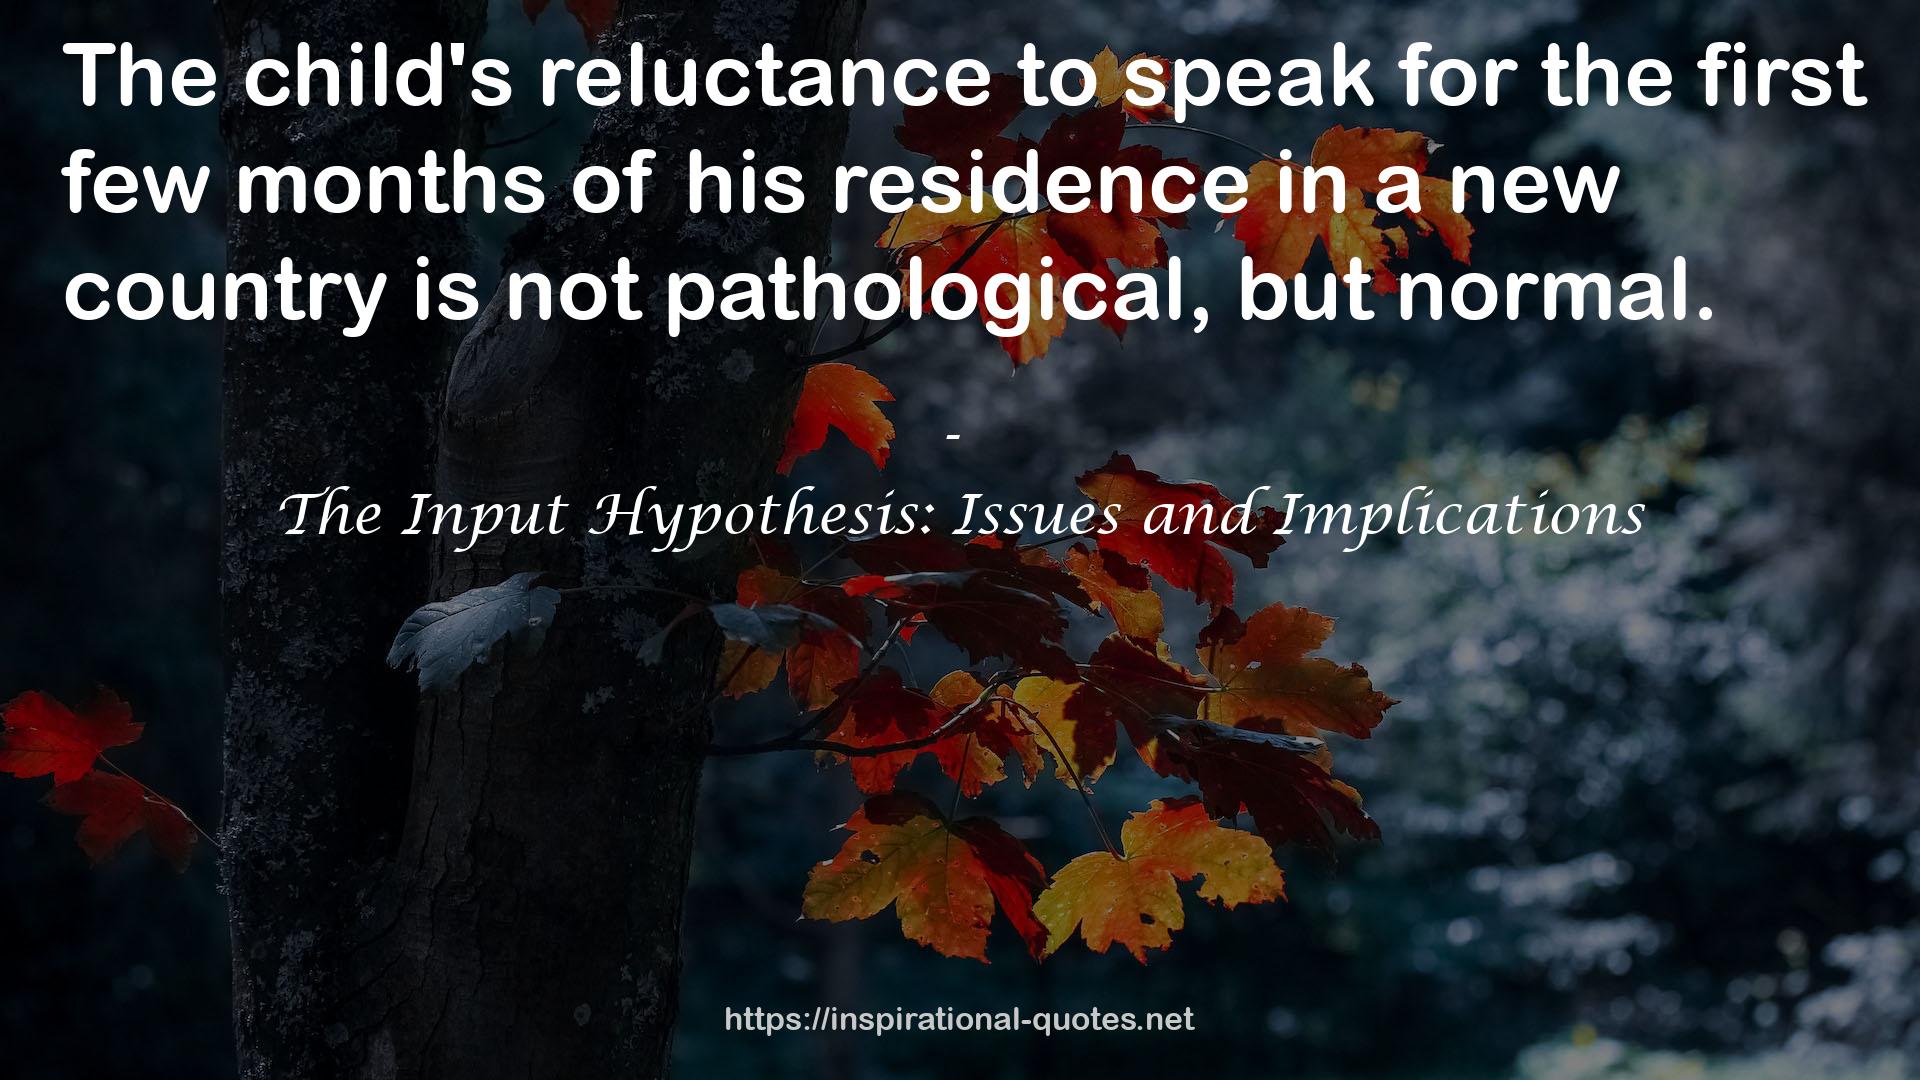 The Input Hypothesis: Issues and Implications QUOTES